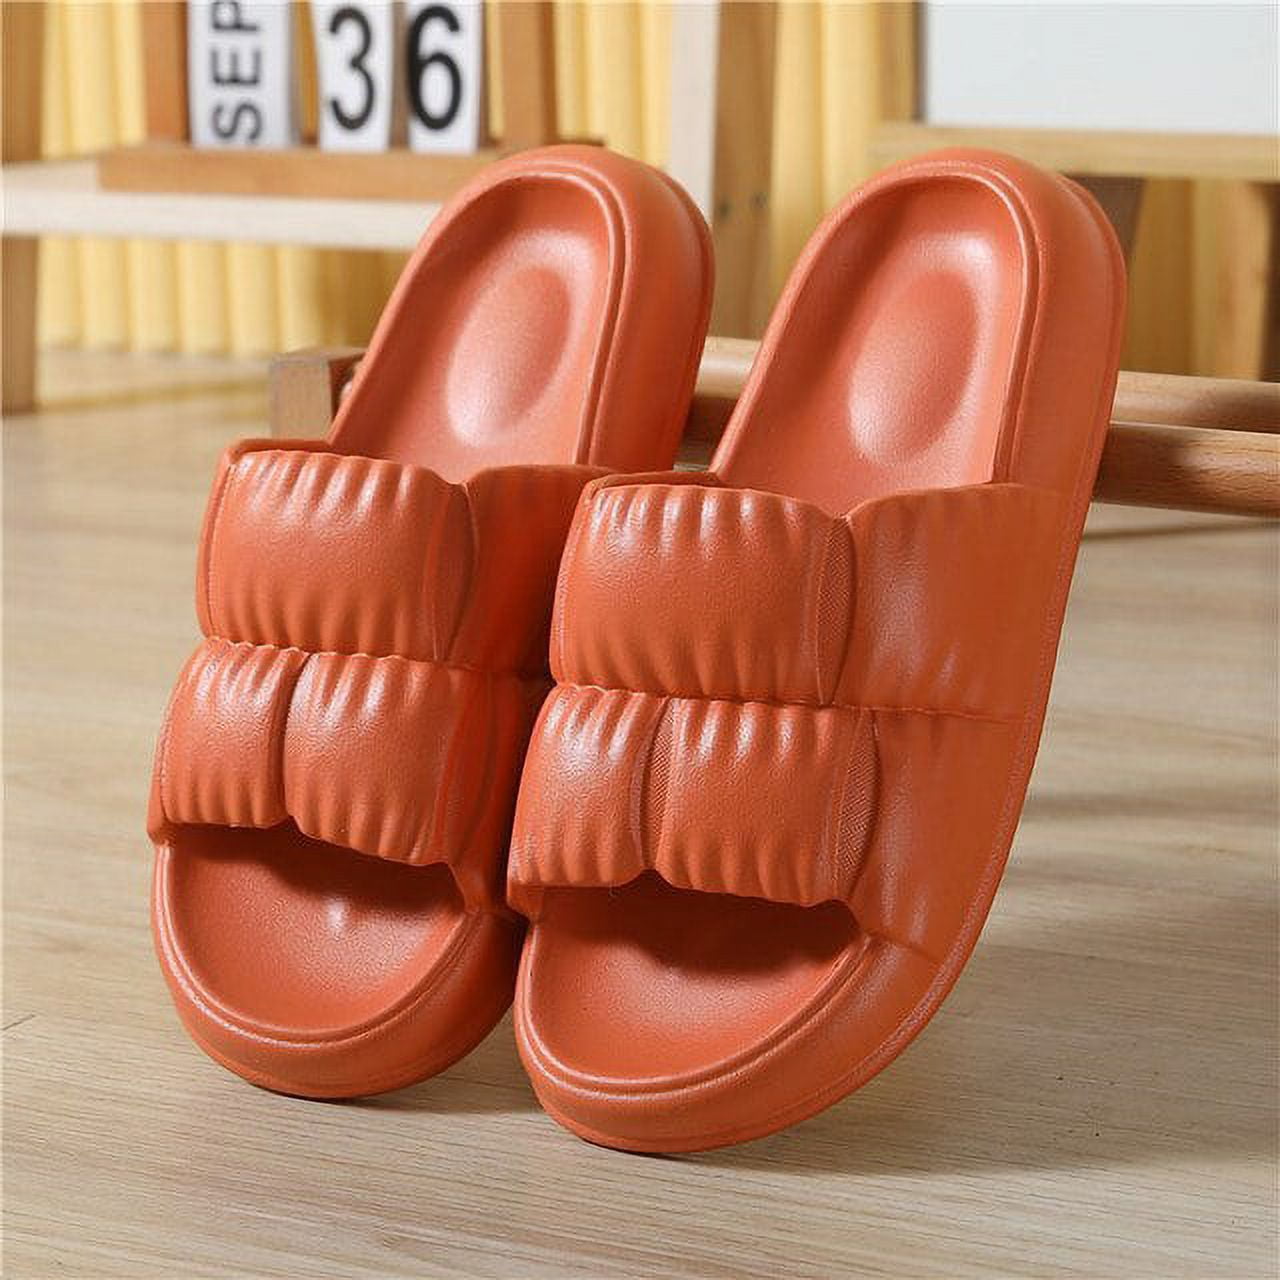 Men's Slippers, Thick-soled Non-slip Home Slippers, Black Bathroom  Thick-soled Home Anti-slip Slippers, All-season Stylish Indoor/outdoor  Slipper.